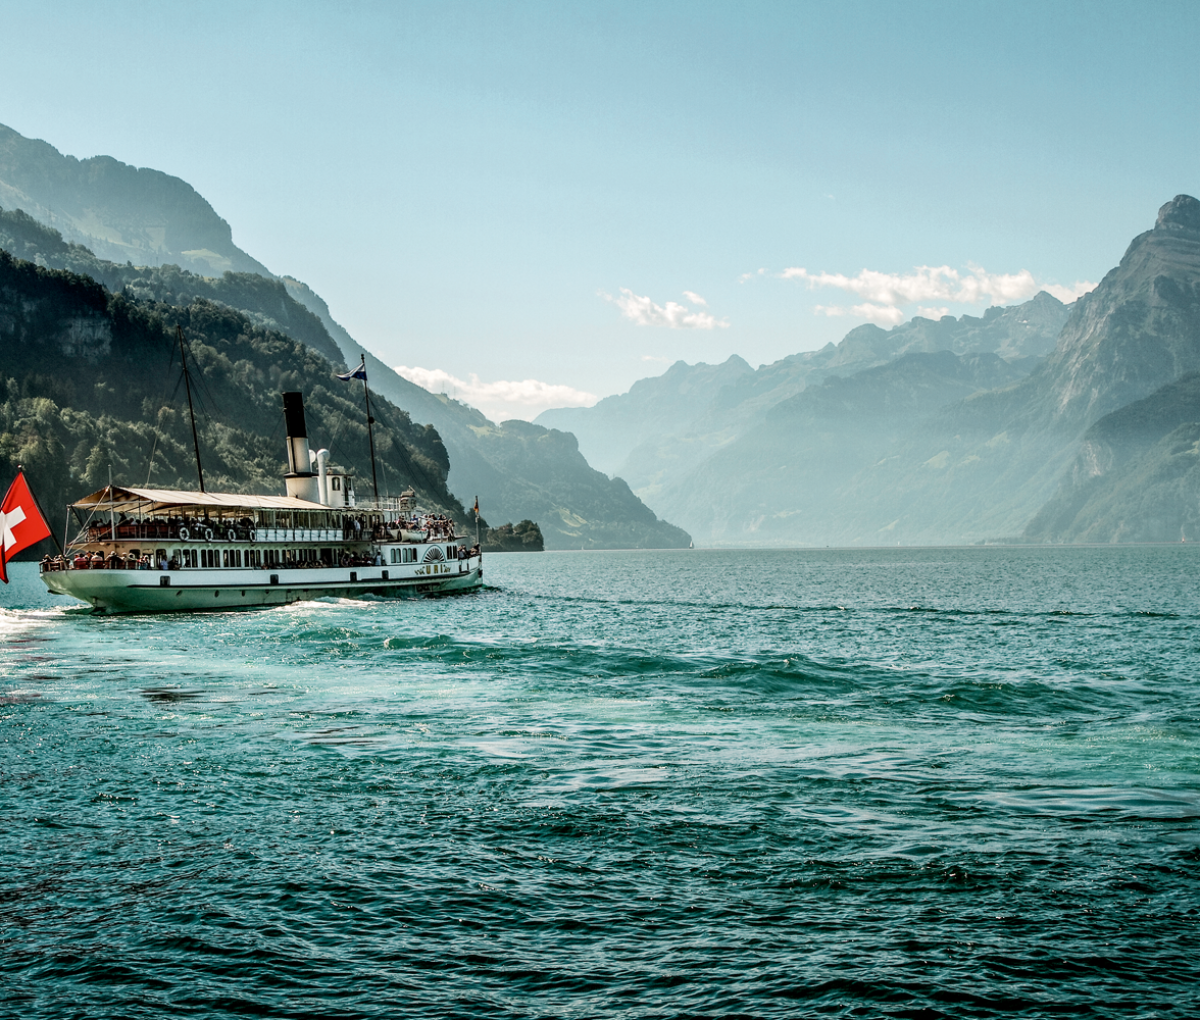 A paddle steamer in Lake Lucerne, Switzerland